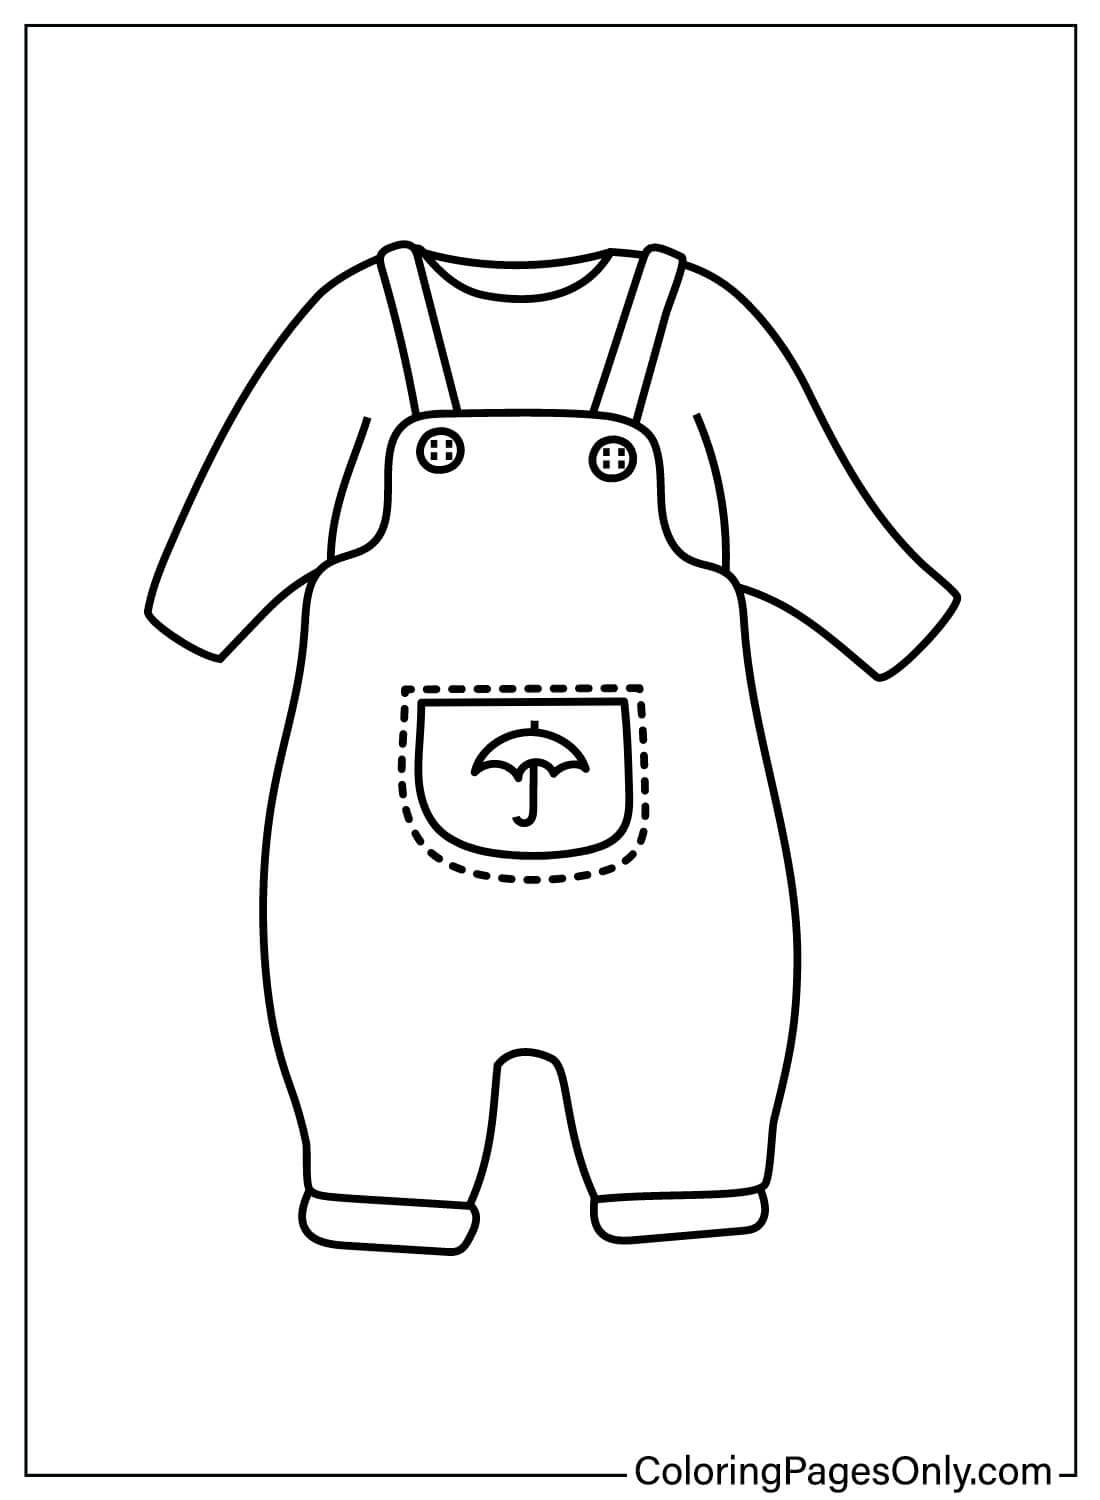 Printable Coloring Pages Baby Clothes - Free Printable Coloring Pages